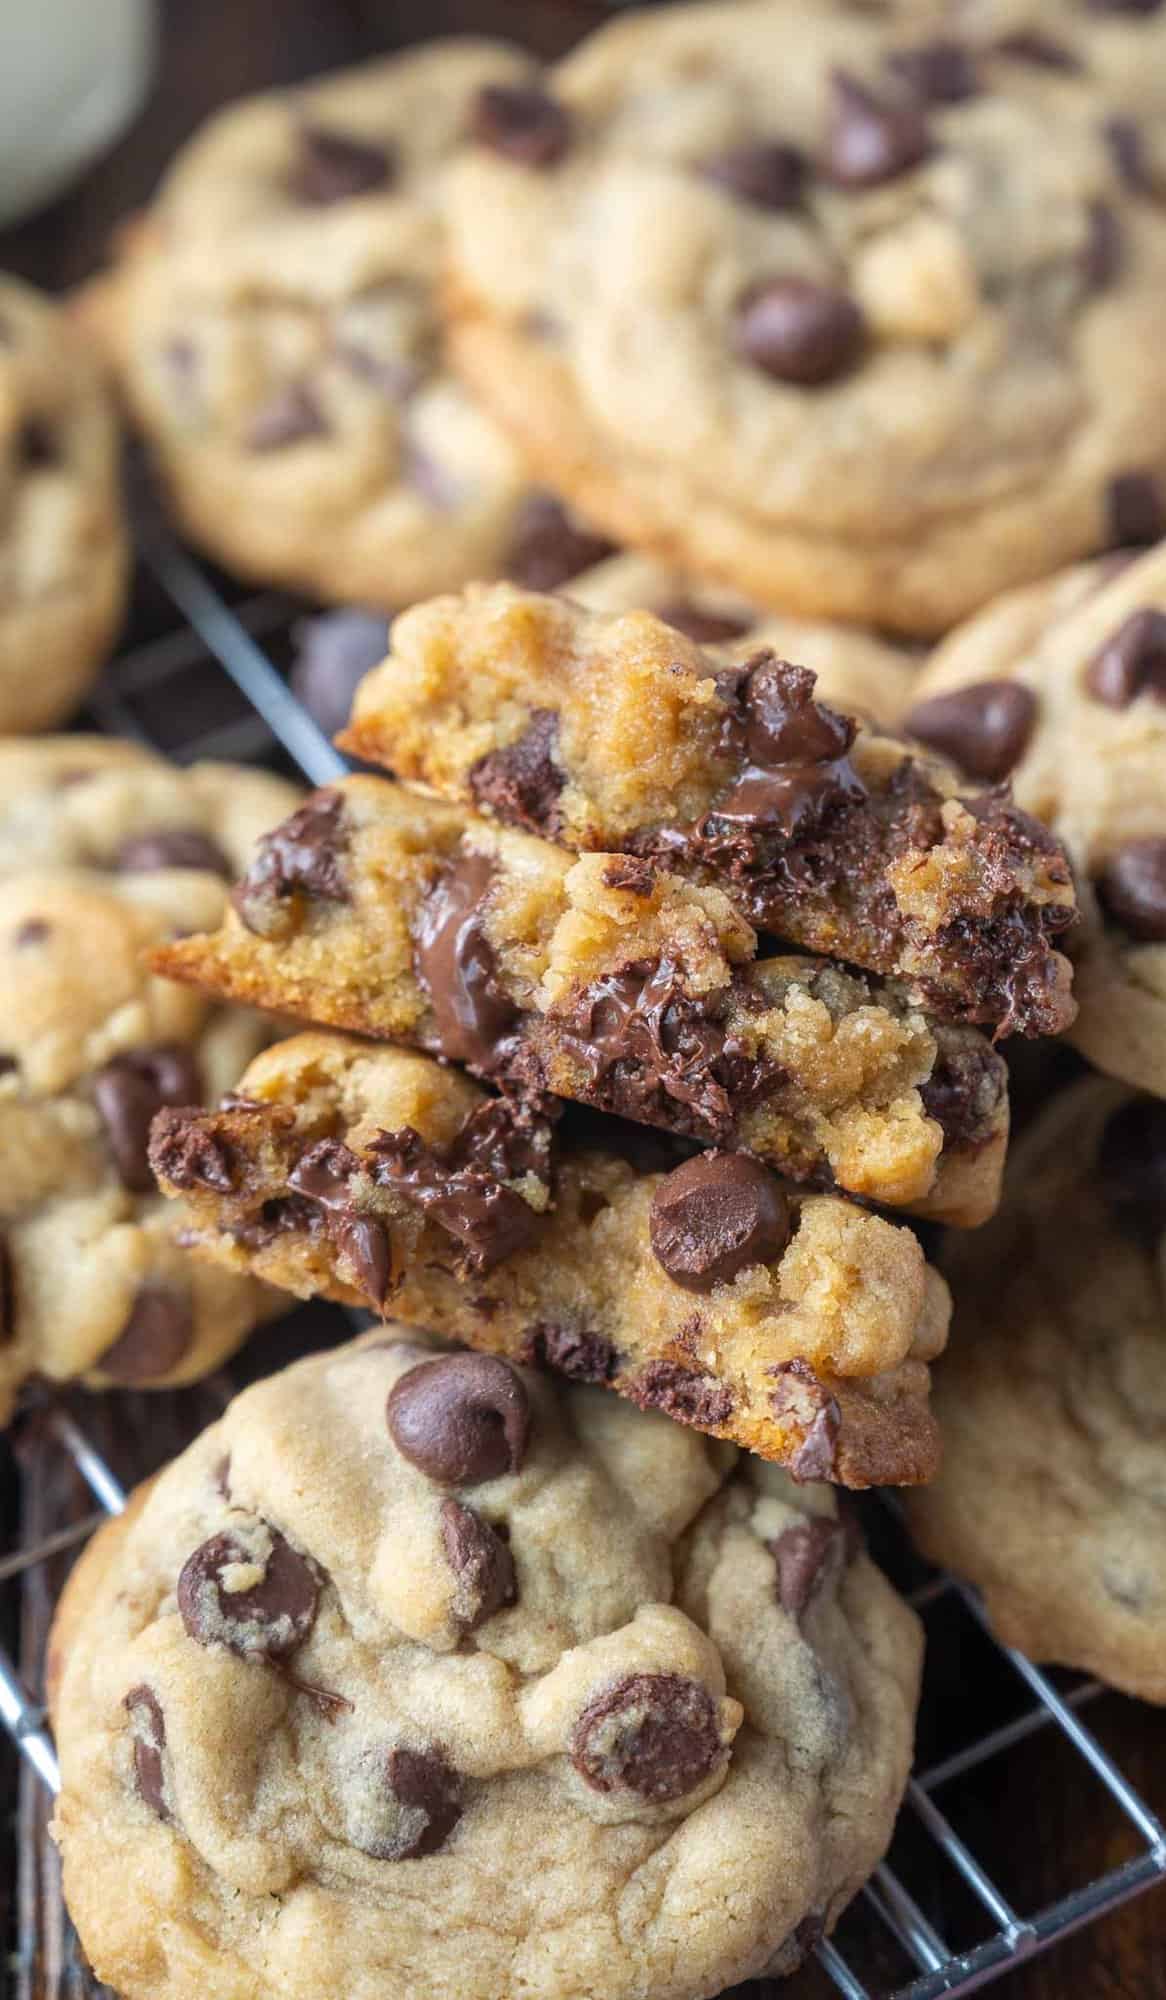 Three half-cookies stacked on top of each other, revealing melty chocolate chips.